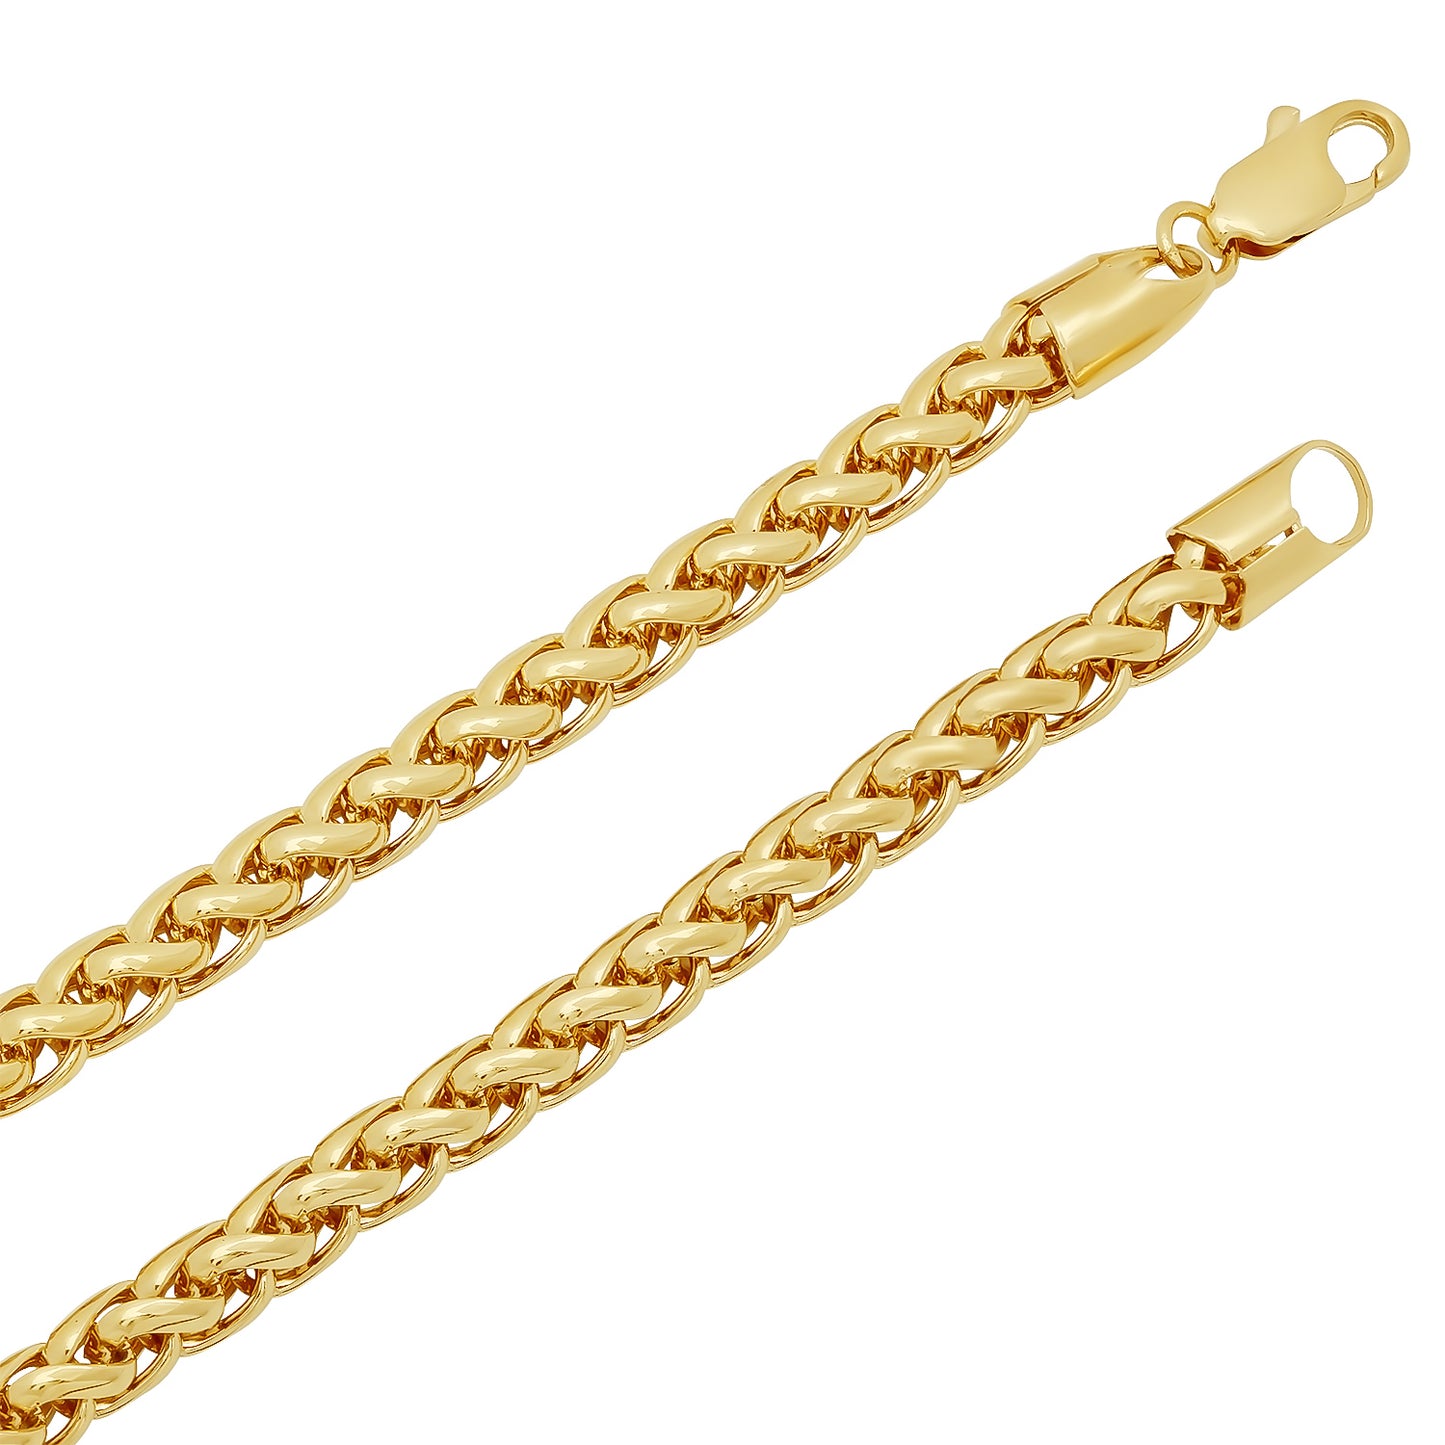 5mm 14k Yellow Gold Plated Braided Wheat Chain Necklace + Bracelet Set (SKU: GL-97BS)